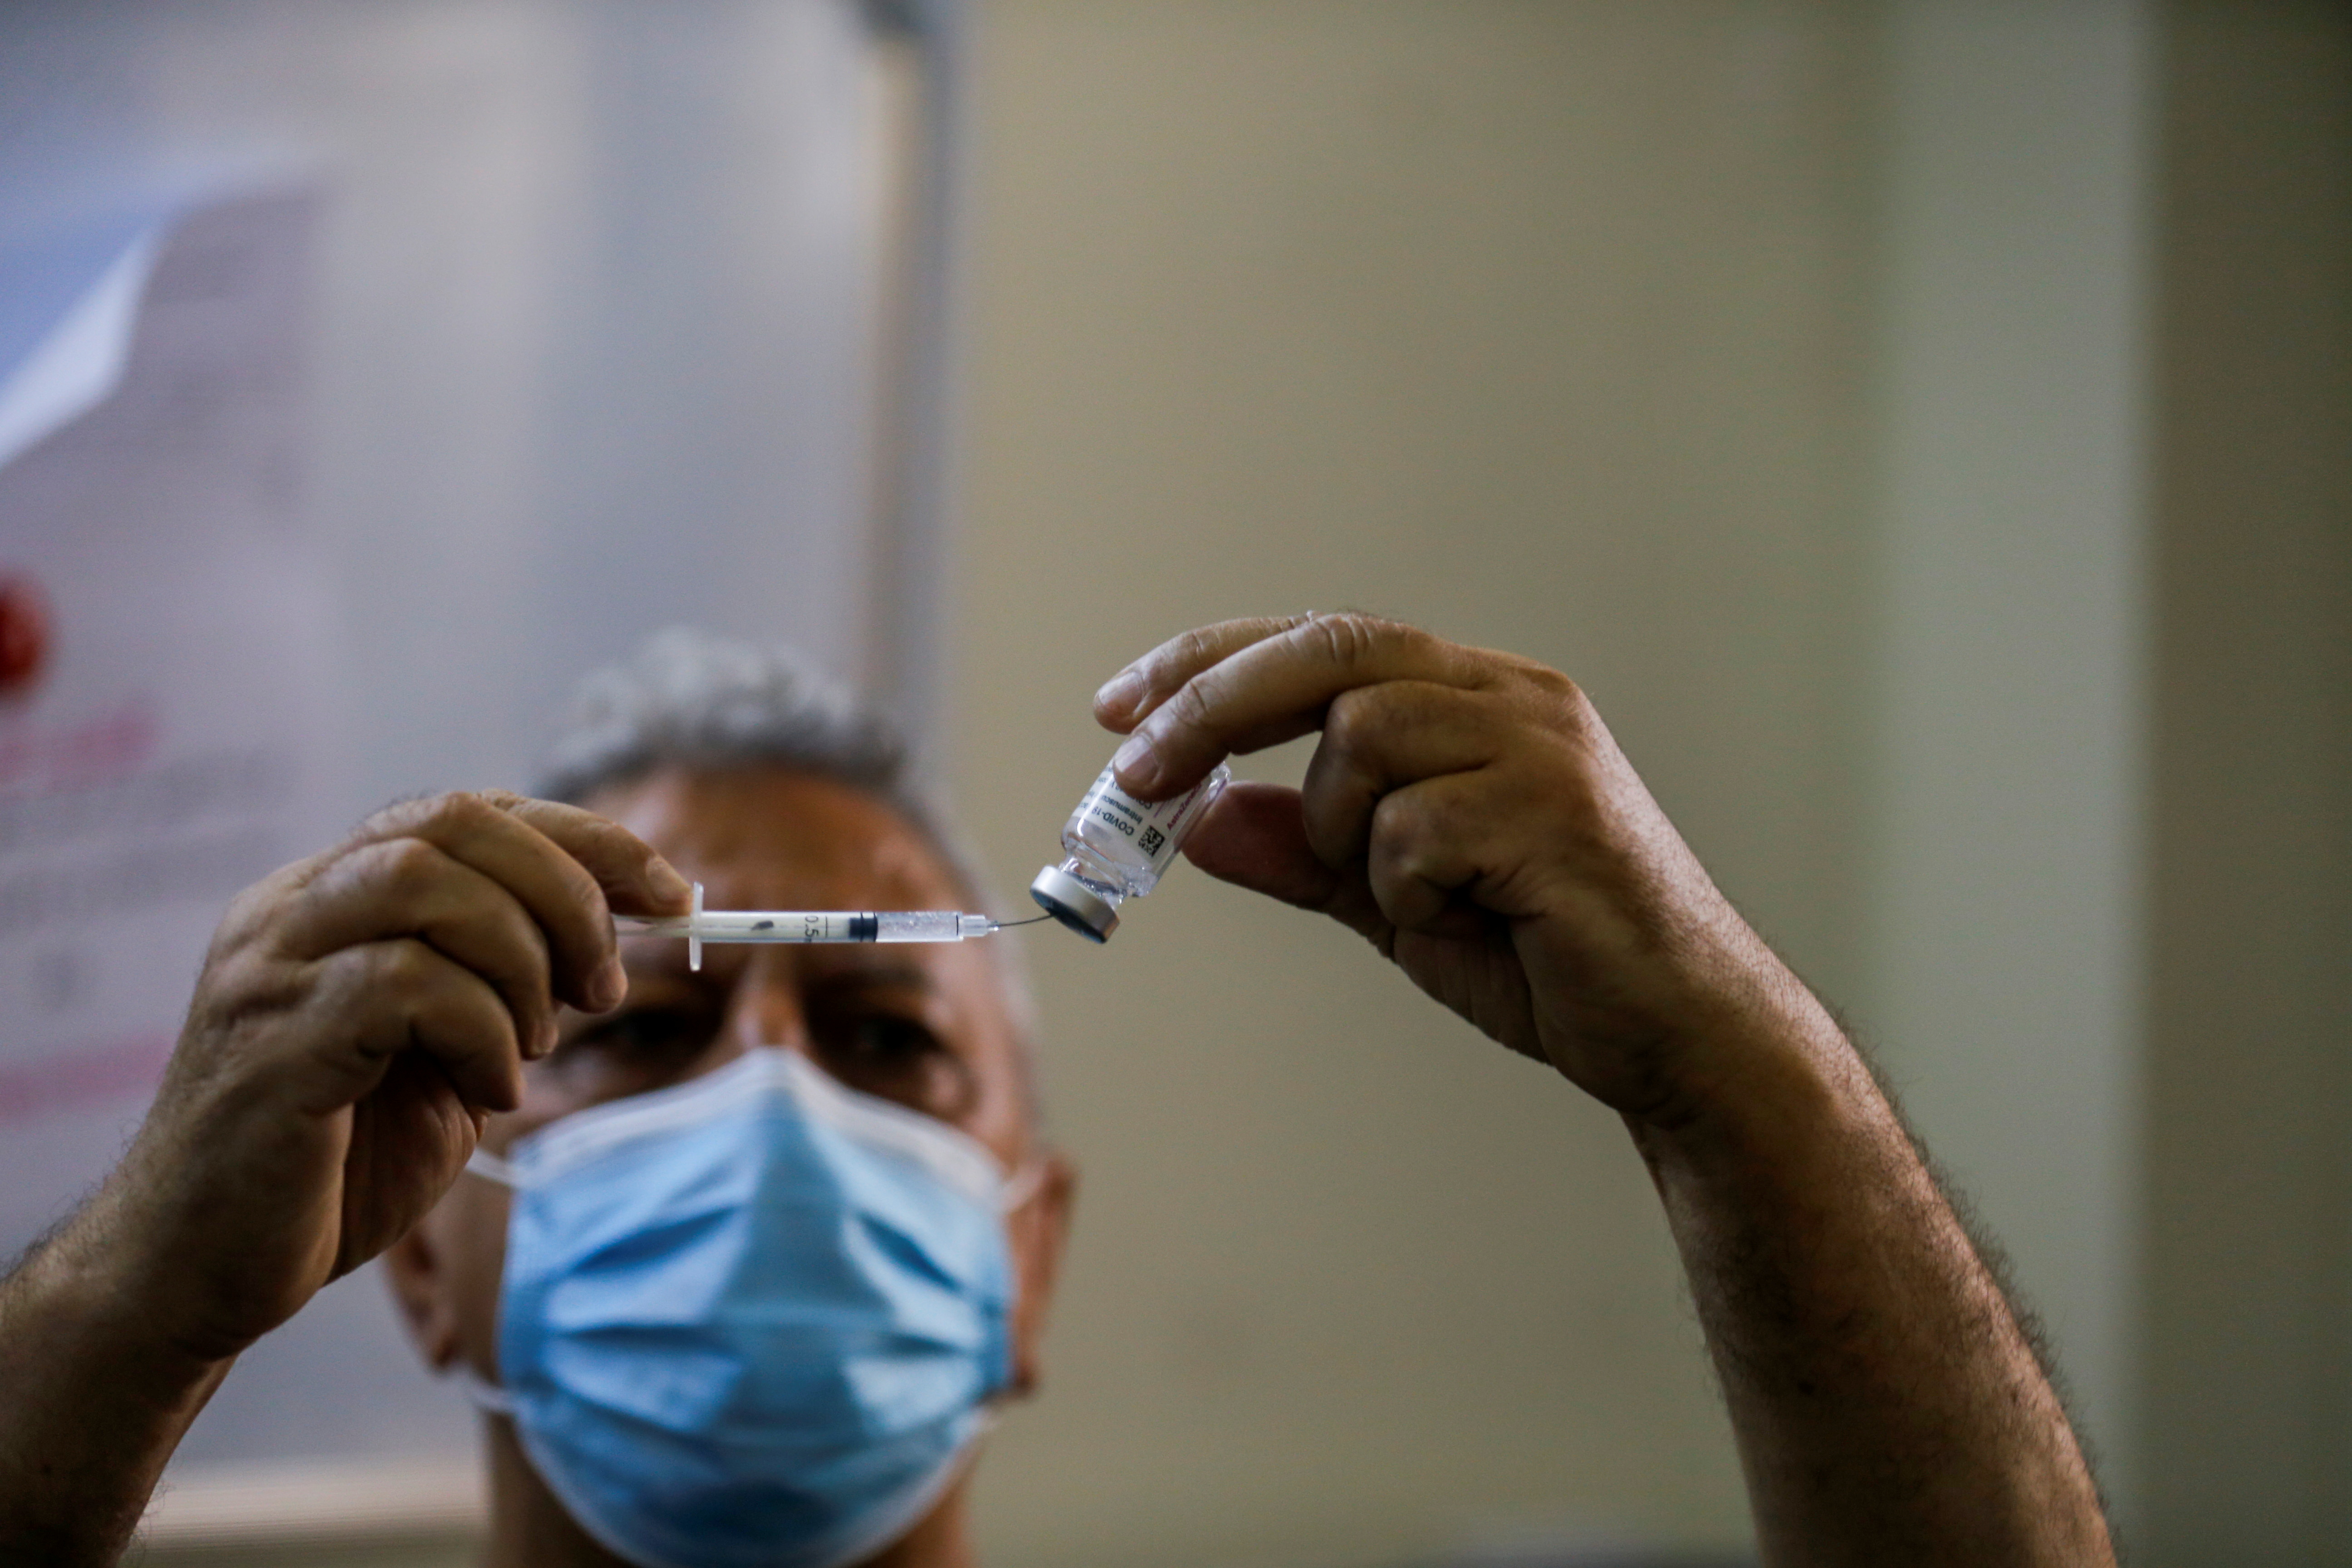 A health worker prepares a vaccine against the coronavirus disease (COVID-19) during a vaccination in Baghdad, Iraq May 22, 2021. REUTERS/Khalid al-Mousily